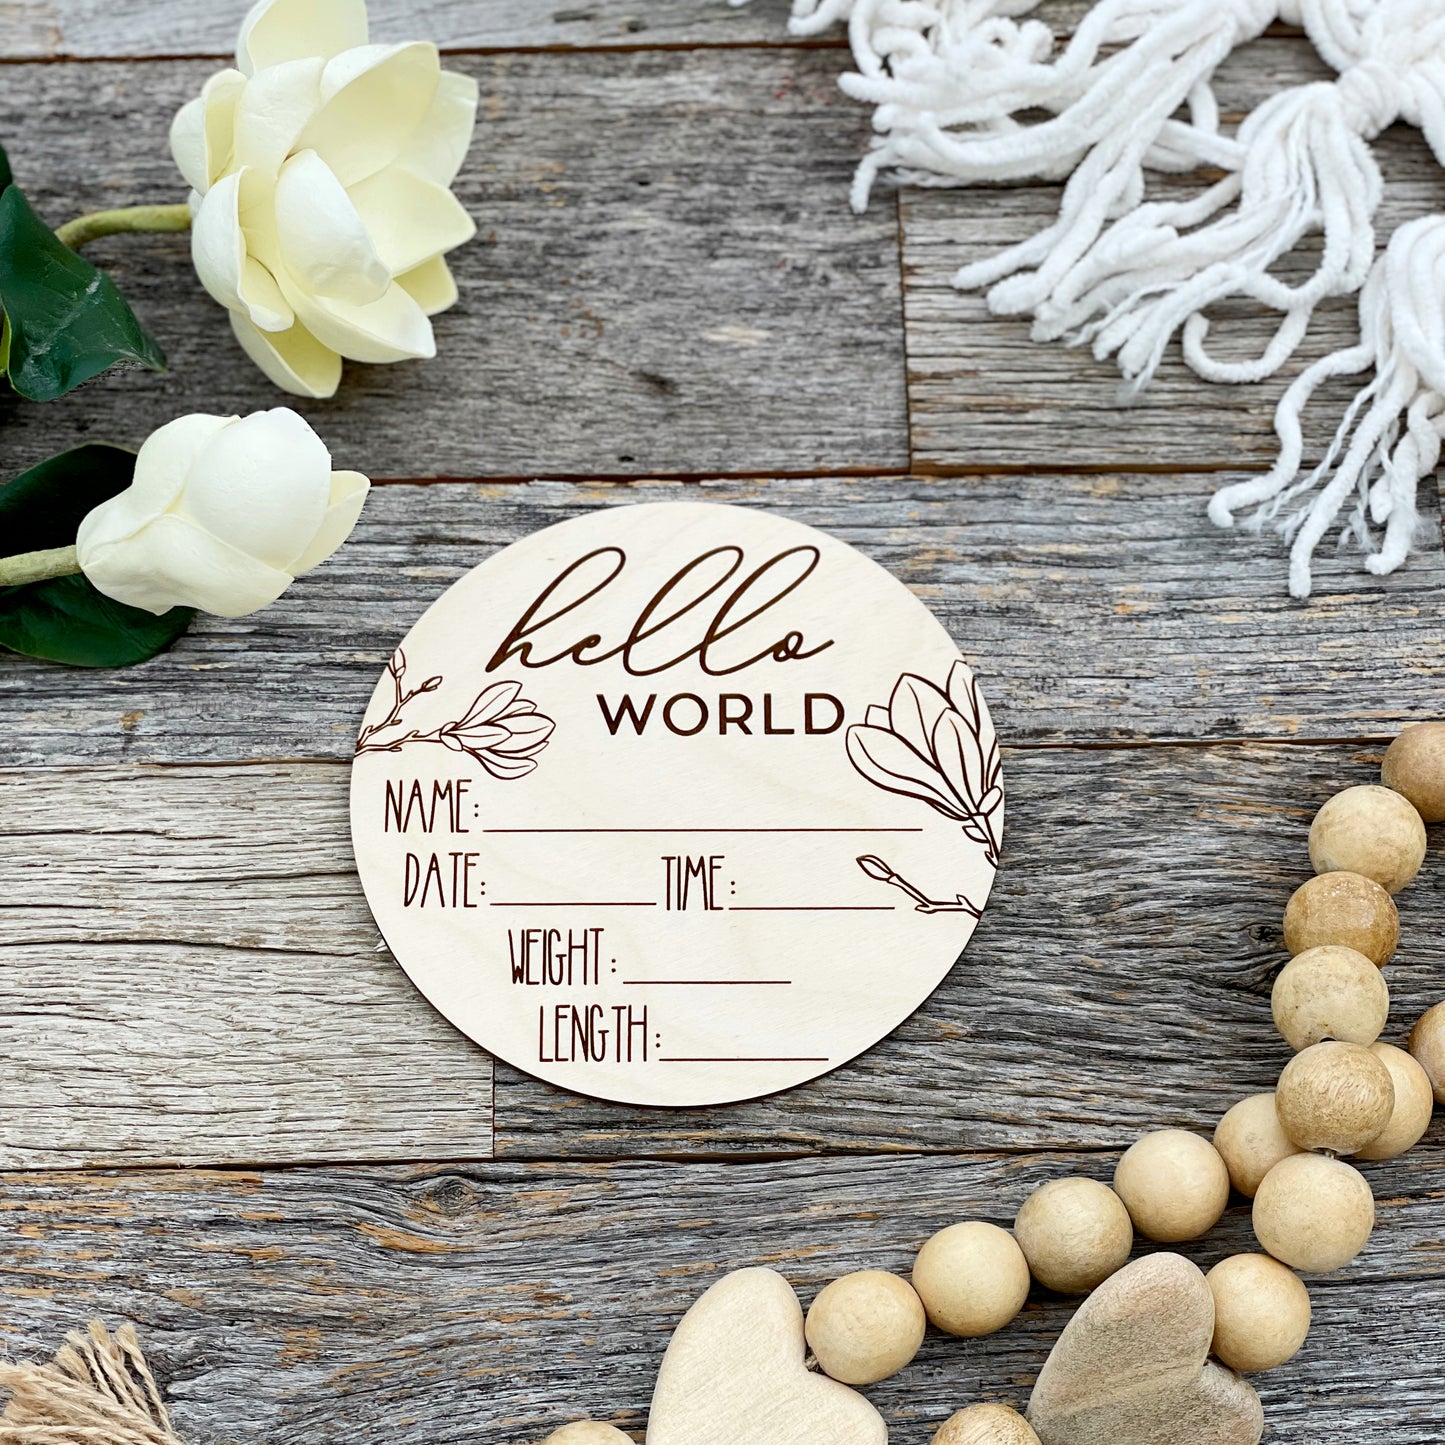 Laser engraved Baby Birth Announcement, magnolia, wooden baby gift, Hello World, baby name announcement